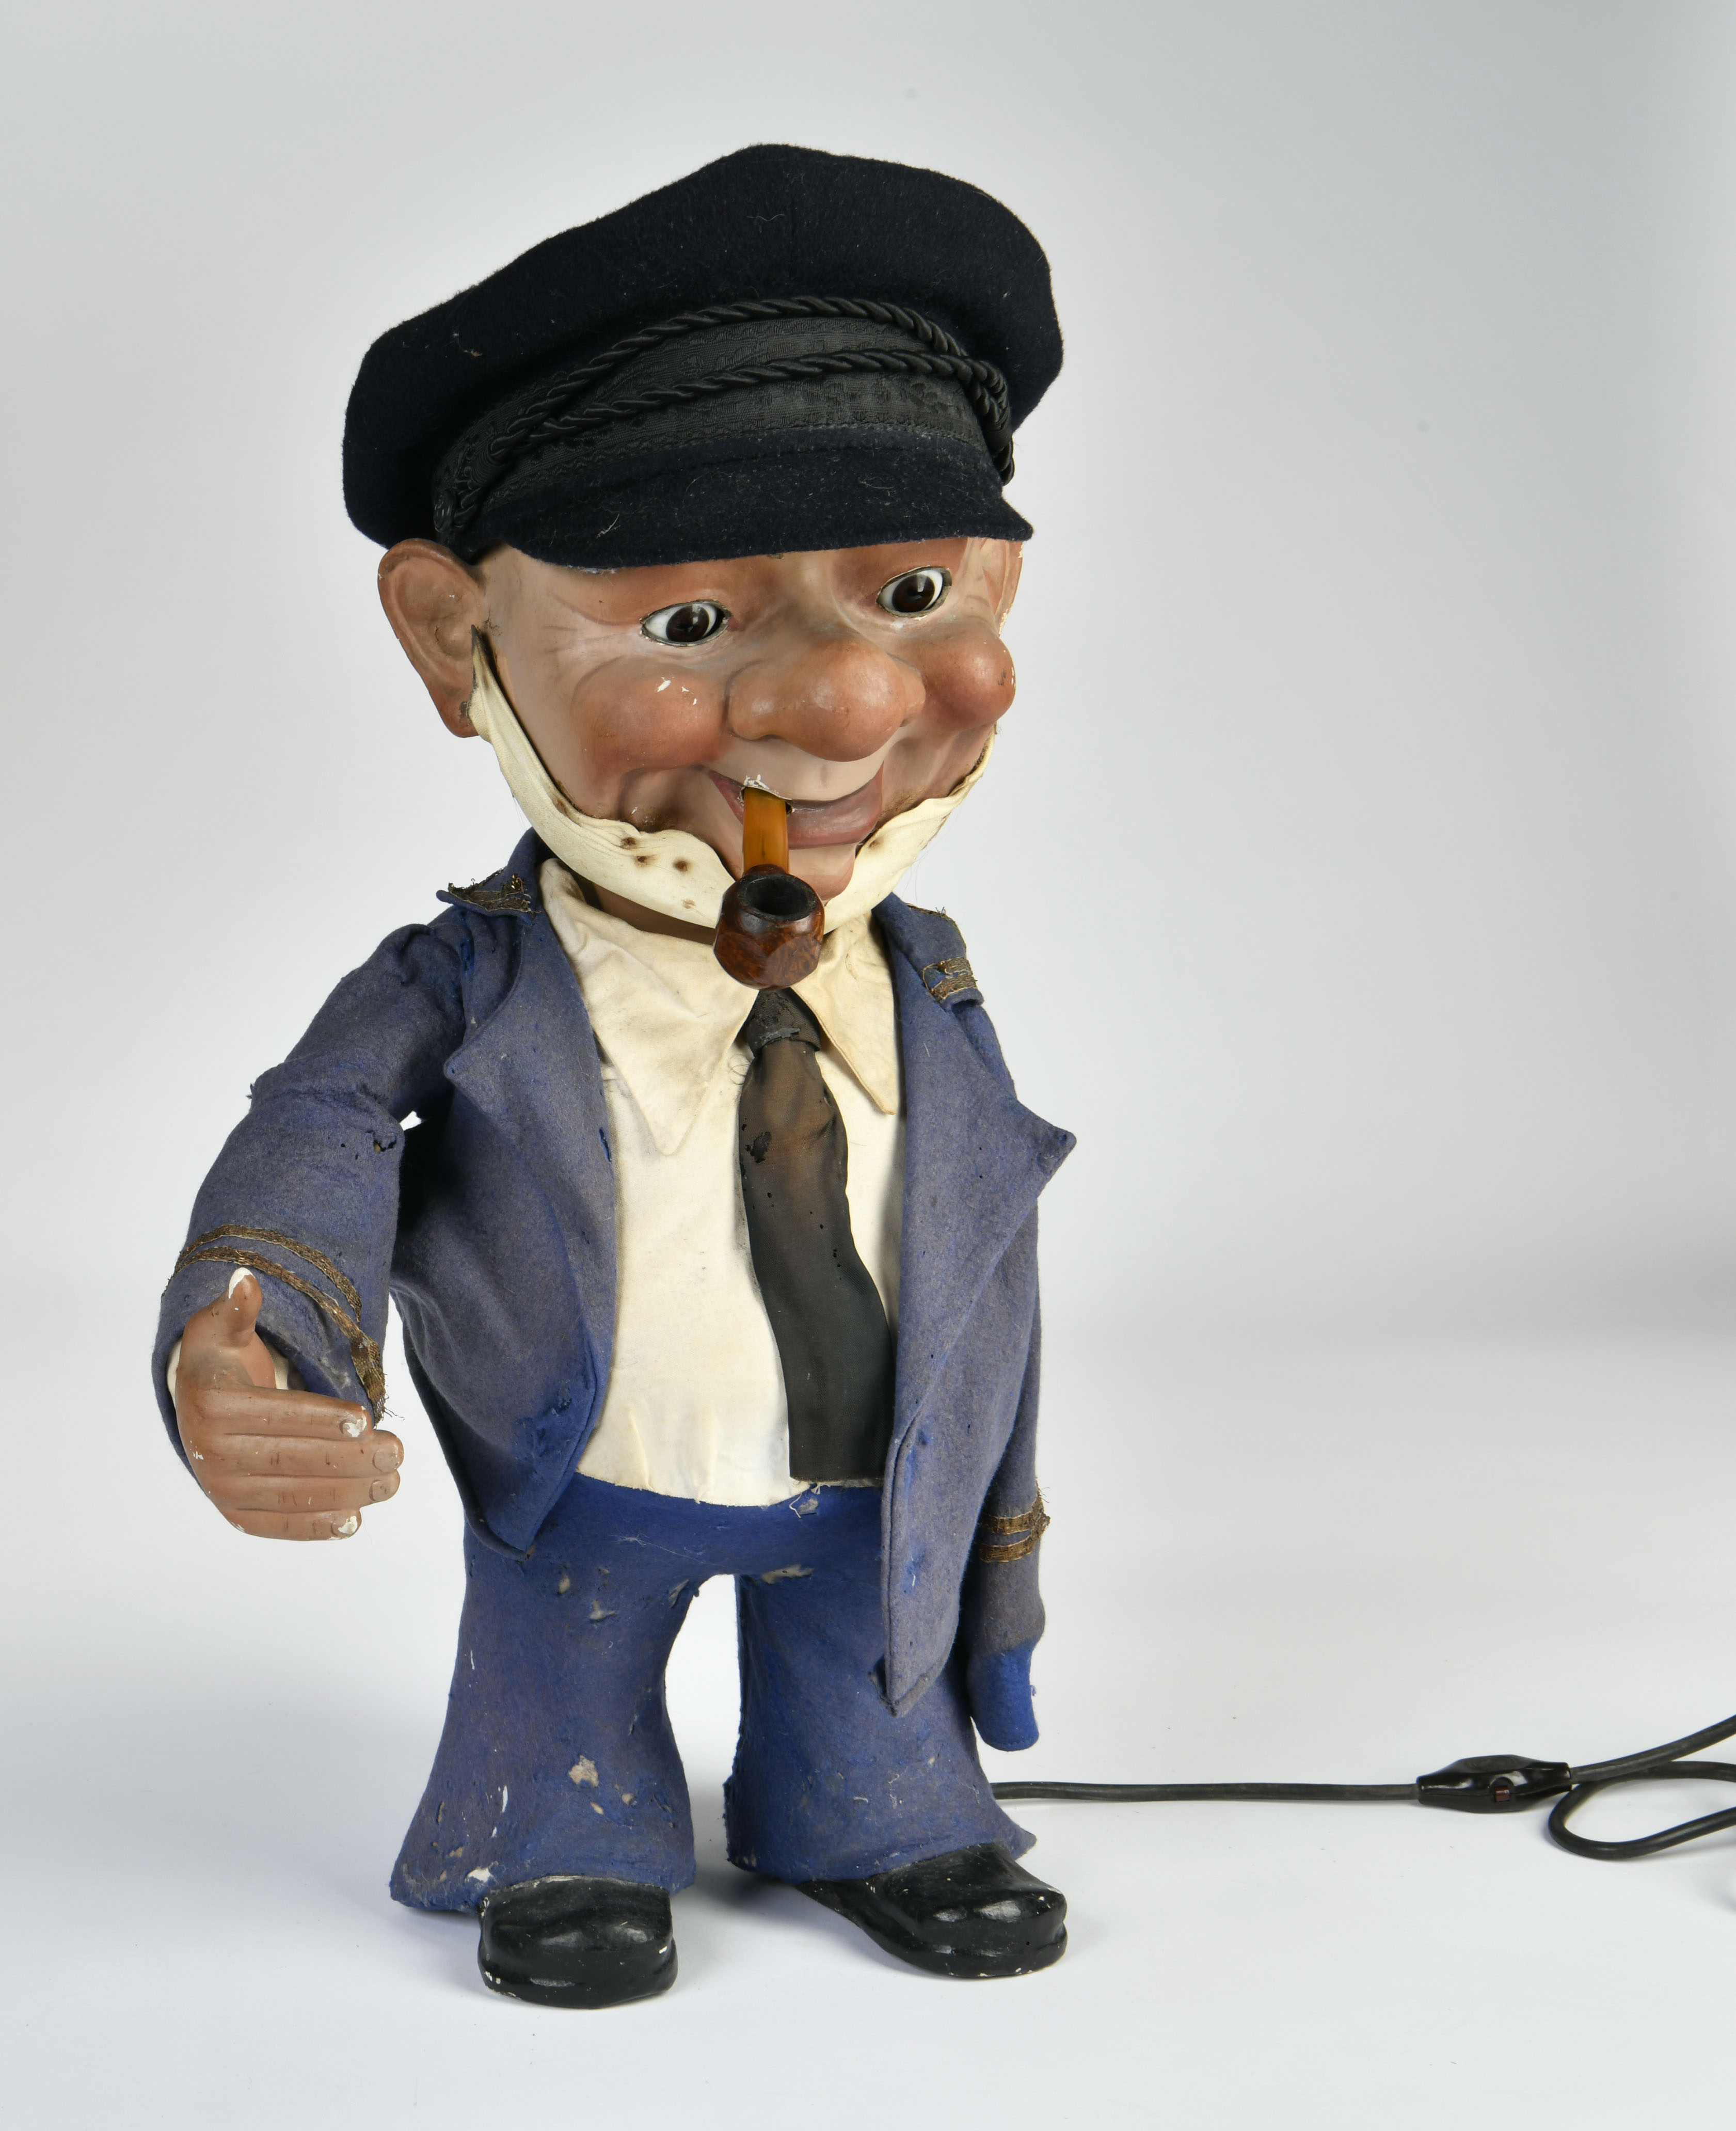 Advertising automaton "captain", bobblehead with limber eyes, electric drive is stiff, one arm is